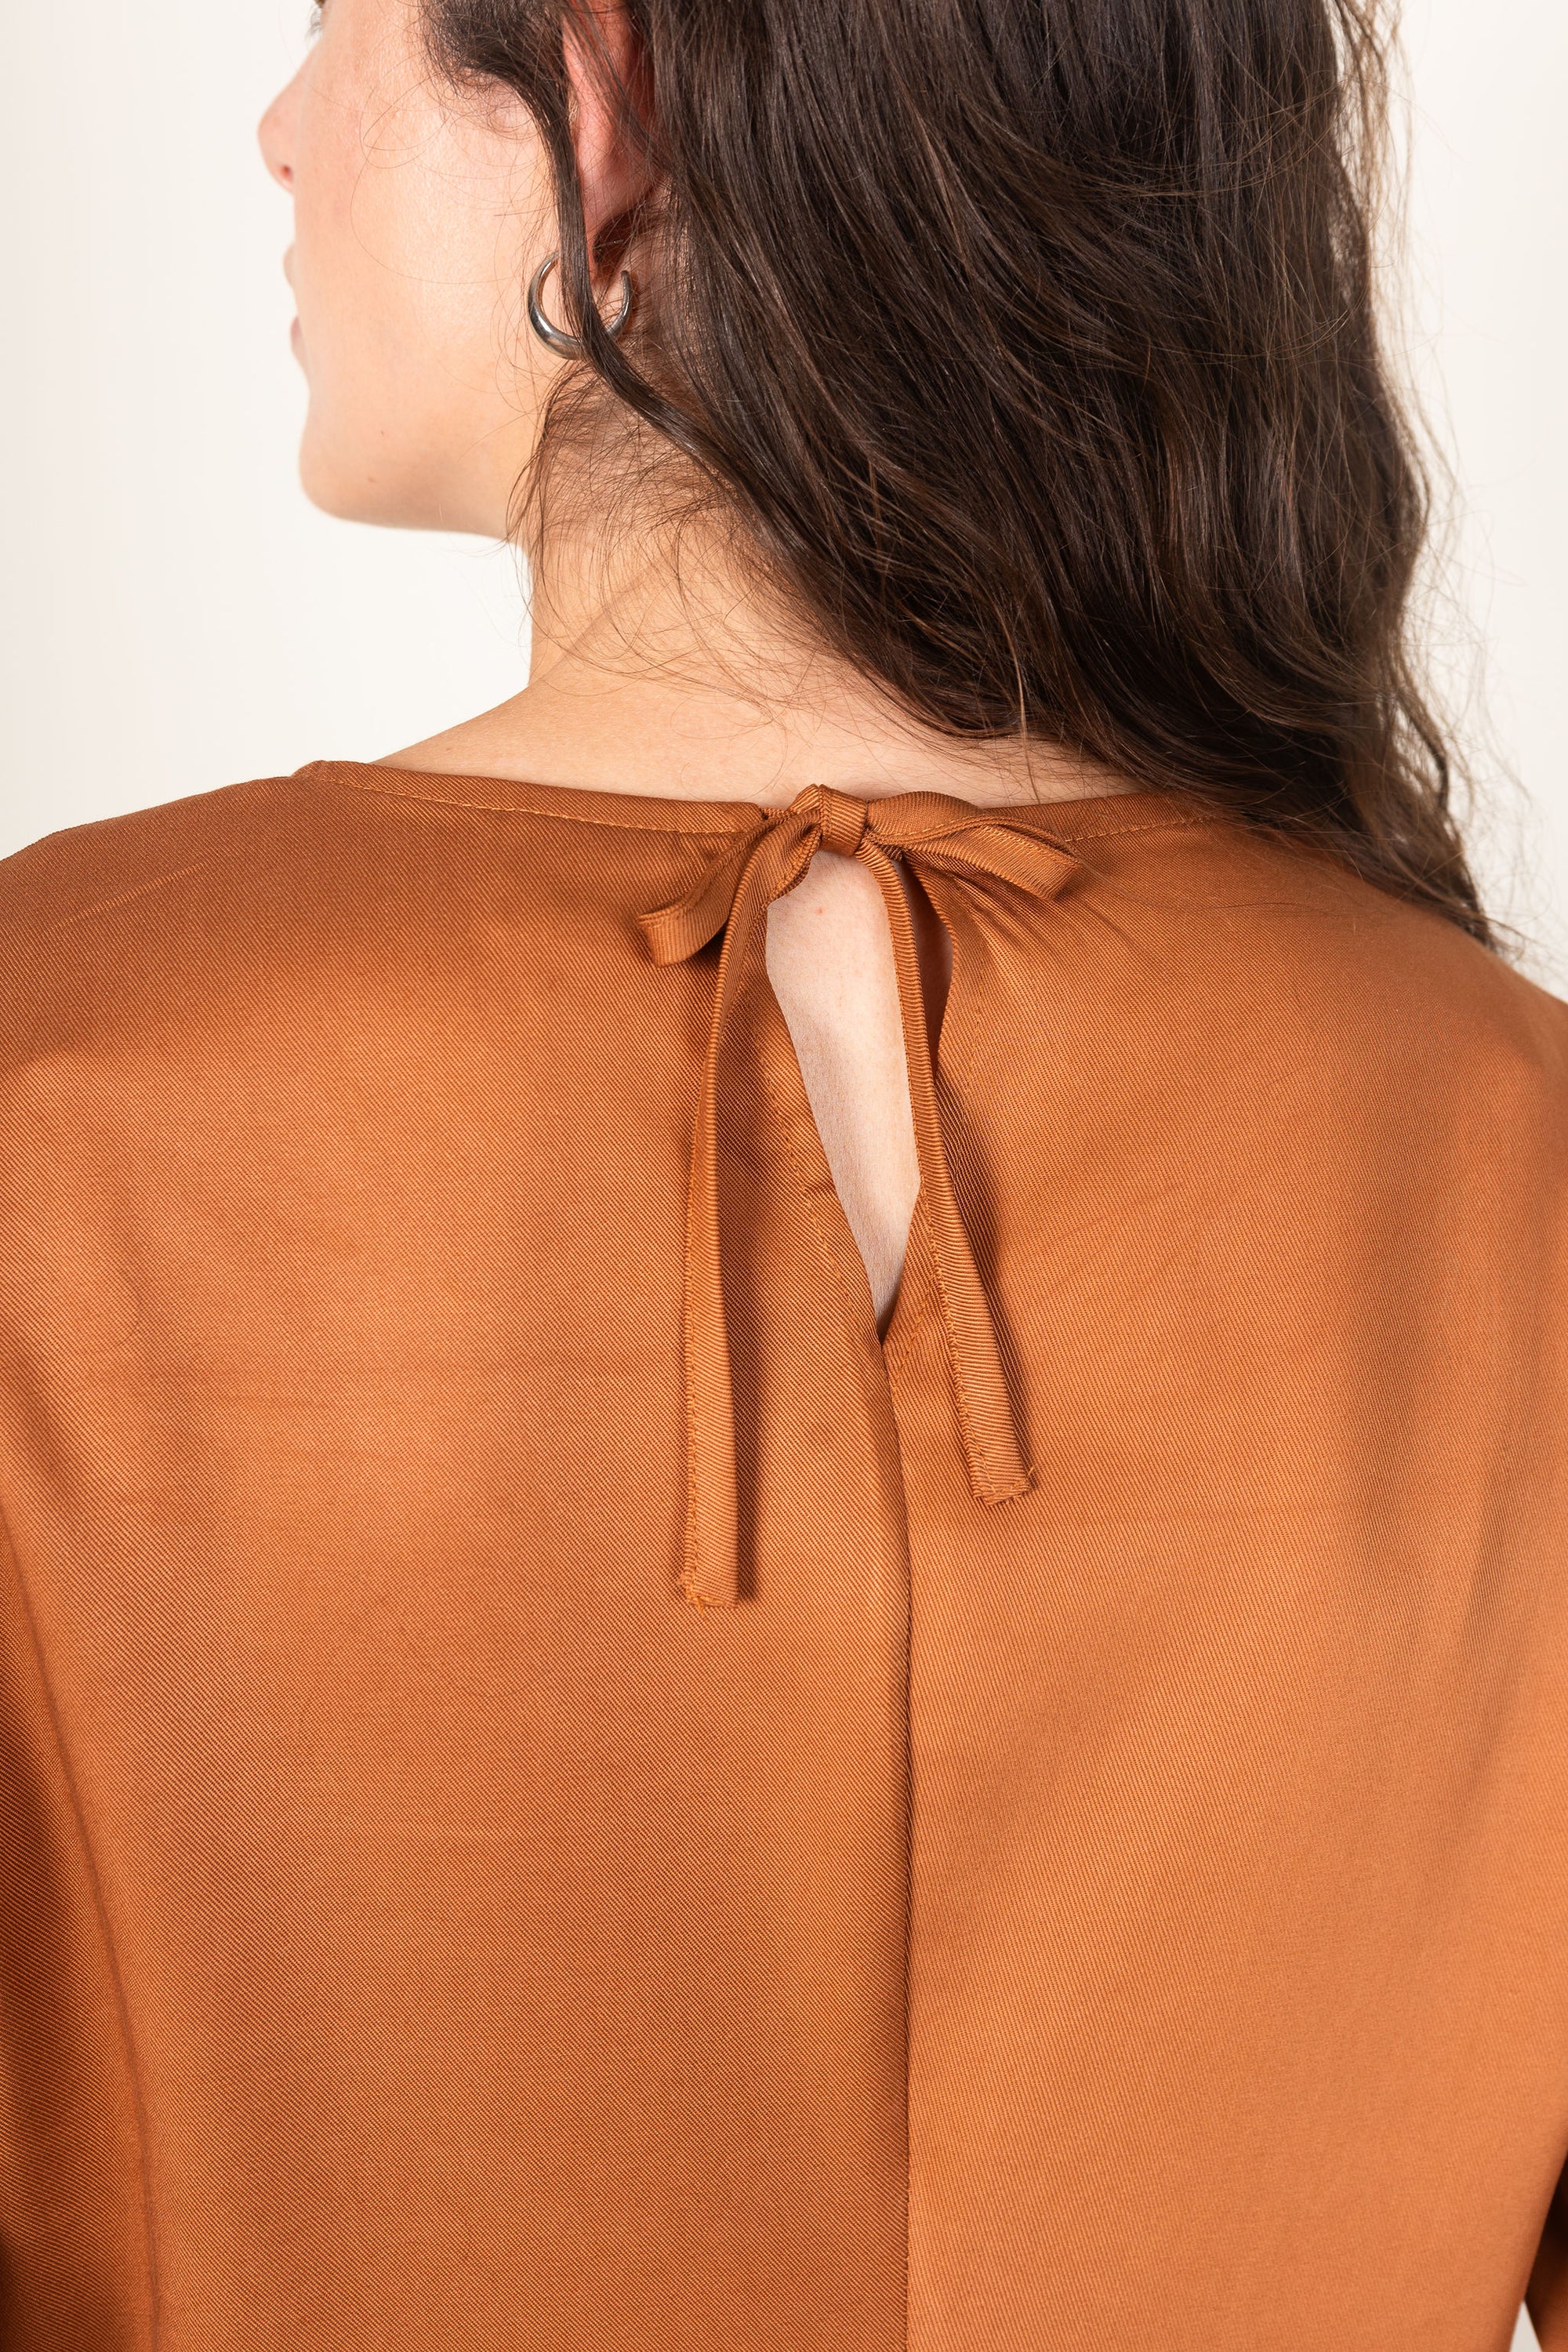 Ames Store Staple Dress in Bronze close up of bow tie back Autumn Winter dress